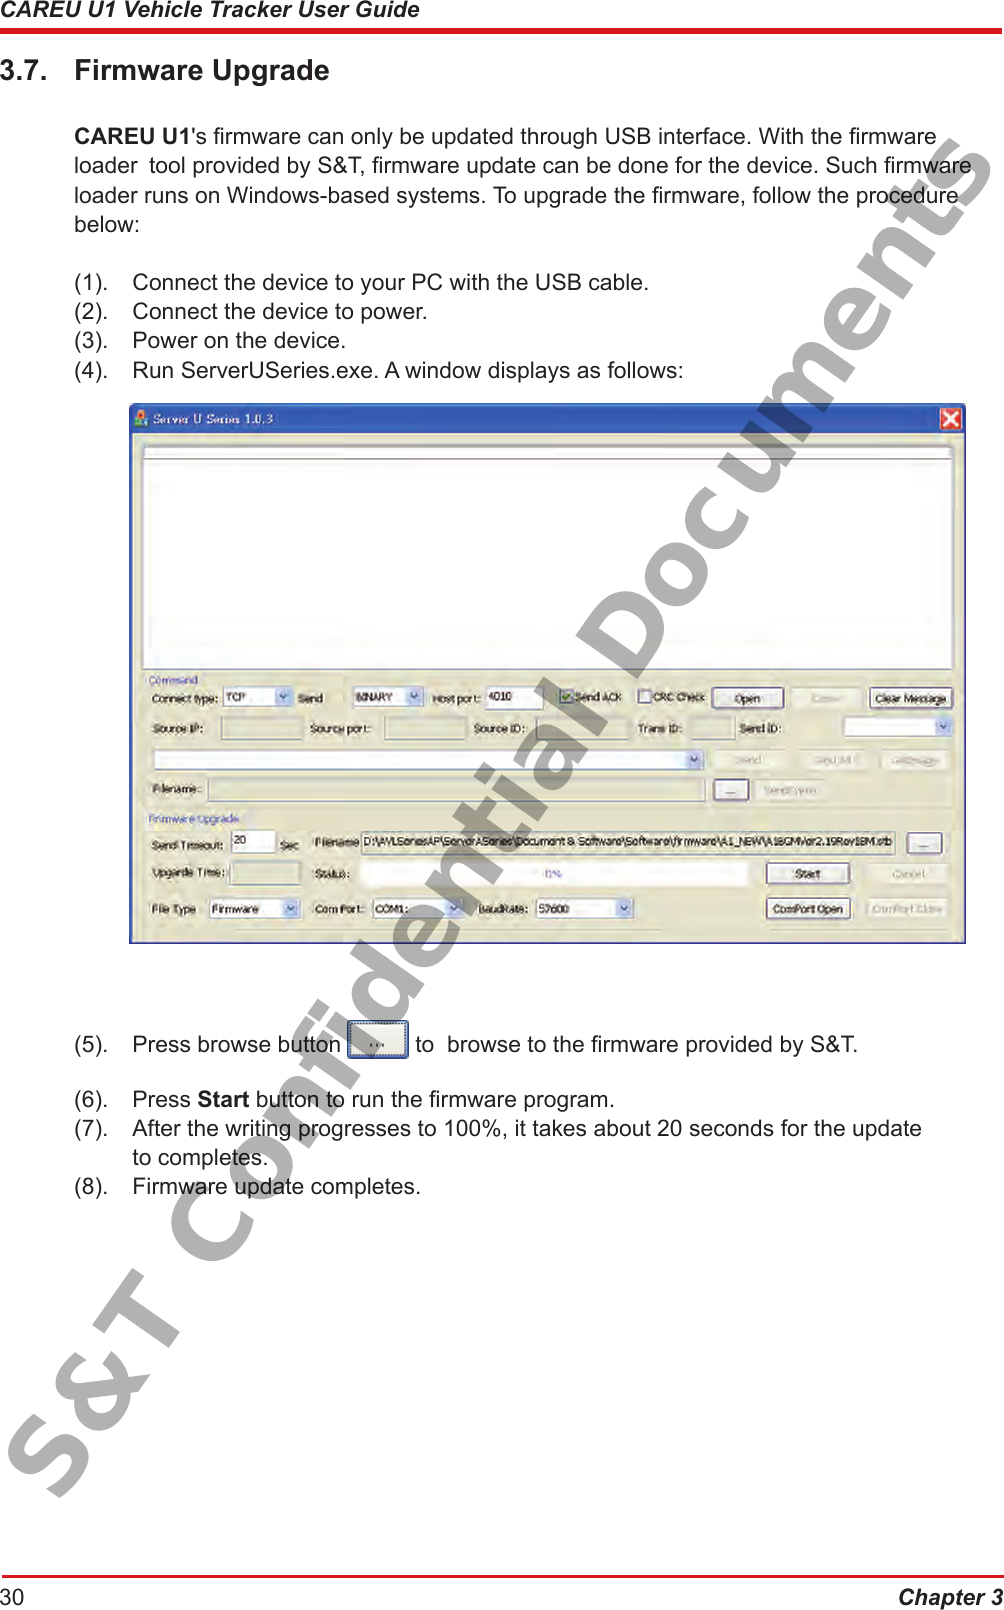 Chapter 330CAREU U1 Vehicle Tracker User Guide3.7.  Firmware Upgrade CAREU U1&apos;s rmware can only be updated through USB interface. With the rmware      loader  tool provided by S&amp;T, rmware update can be done for the device. Such rmware    loader runs on Windows-based systems. To upgrade the rmware, follow the procedure     below:   (1).  Connect the device to your PC with the USB cable.  (2).  Connect the device to power.  (3).  Power on the device.  (4).  Run ServerUSeries.exe. A window displays as follows:  (5).  Press browse button   to  browse to the rmware provided by S&amp;T.  (6).  Press Start button to run the rmware program.  (7).  After the writing progresses to 100%, it takes about 20 seconds for the update        to completes.  (8).  Firmware update completes.S&amp;T Confidential Documents